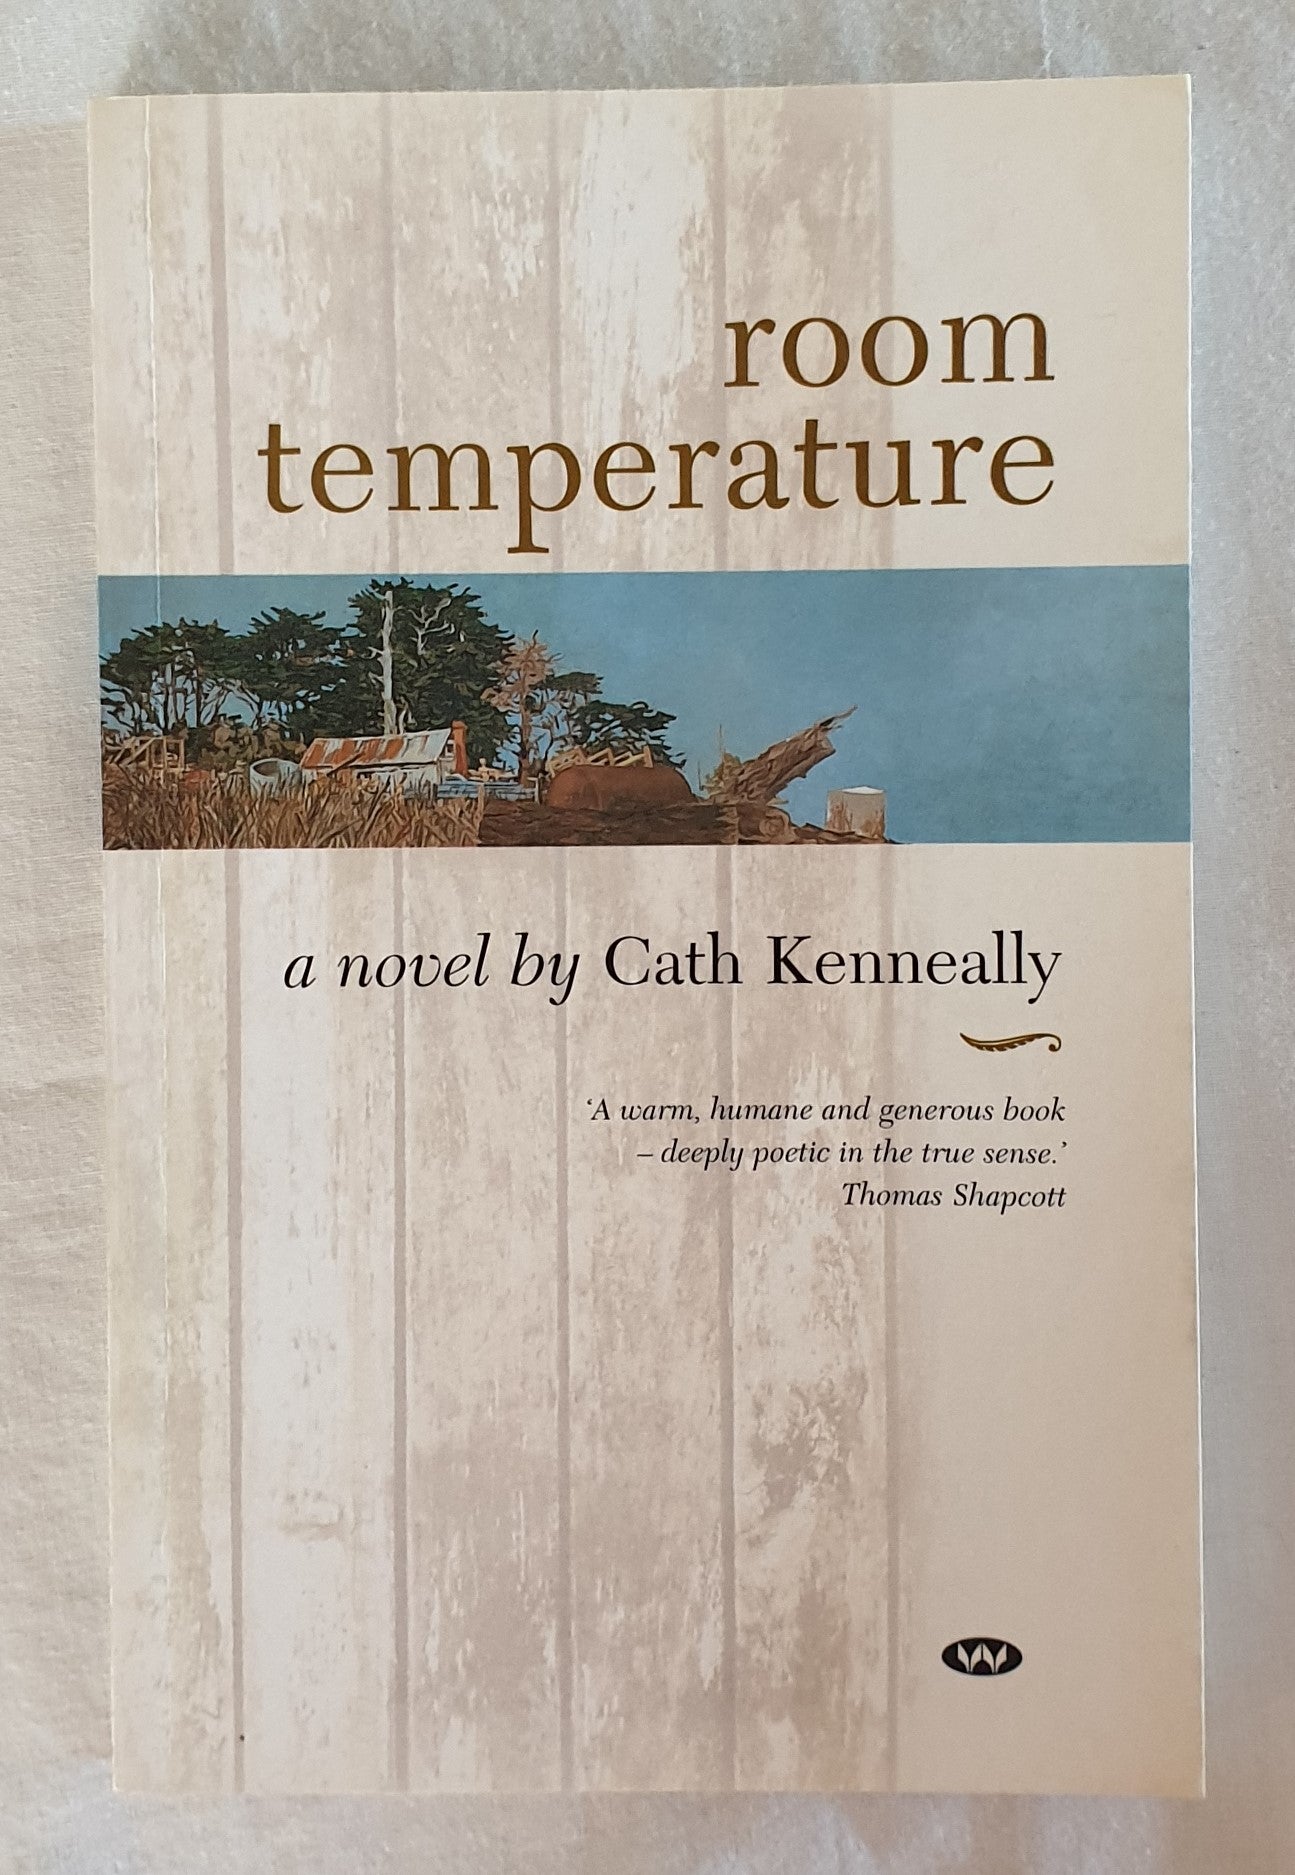 Room Temperature by Cath Kenneally